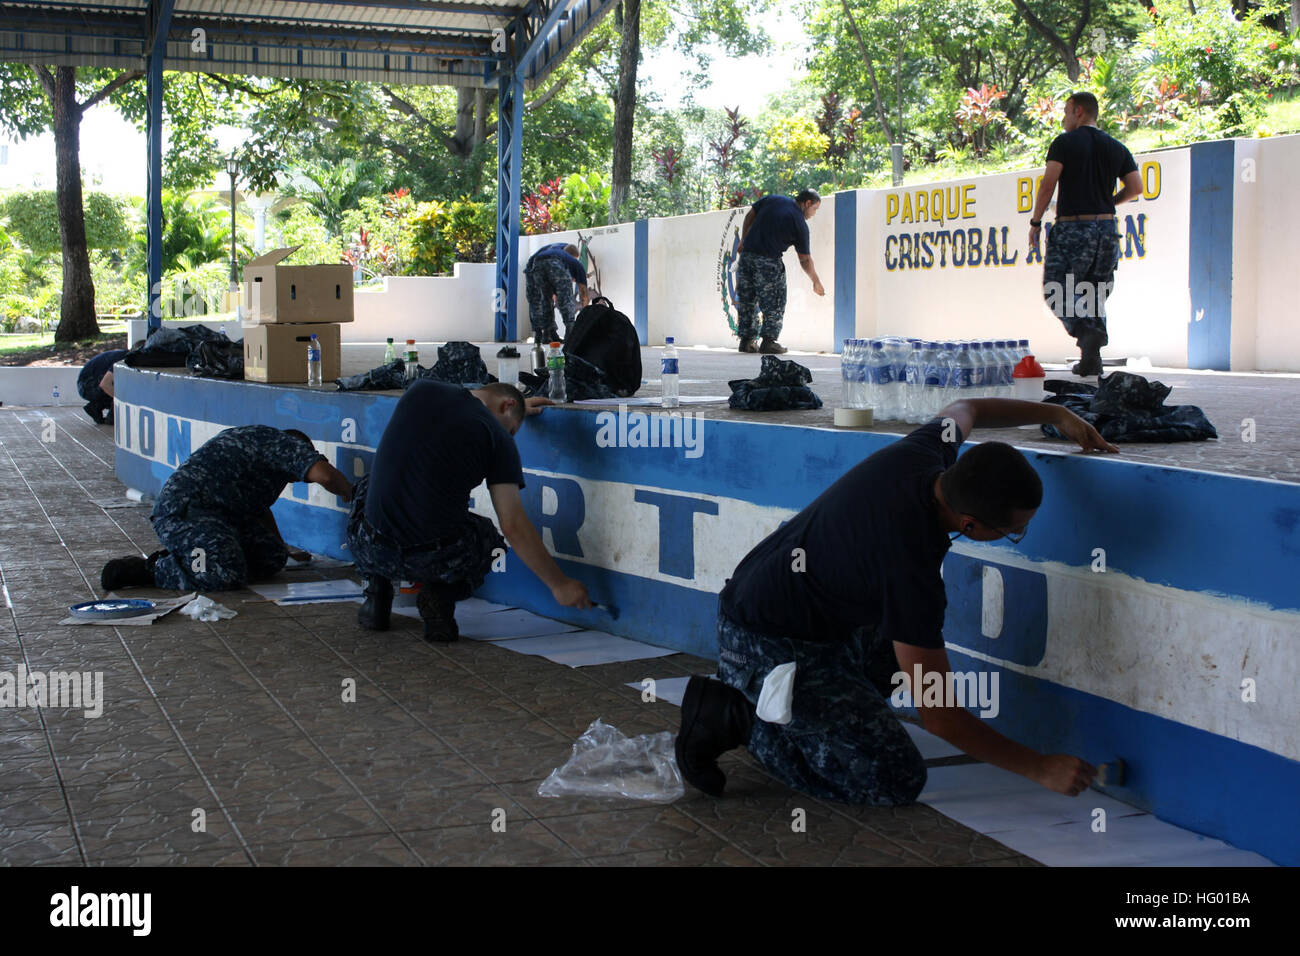 110831-N-ZI300-064  ACAJUTLA, El Salvador (Aug. 31, 2011) Sailors assigned to the guided-missile frigate USS Thach (FFG 43) paint the stage and pavilion at the Cristobal Aleman Botanical Park as part of a community service project during a port visit. Thach is deployed to Central and South America supporting Southern Seas 2011. (U.S. Navy photo by Mass Communication Specialist 1st Class Steve Smith/Released) US Navy 110831-N-ZI300-064 Sailors assigned to the guided-missile frigate USS Thach (FFG 43) paint the stage and pavilion at the Cristobal Aleman B Stock Photo